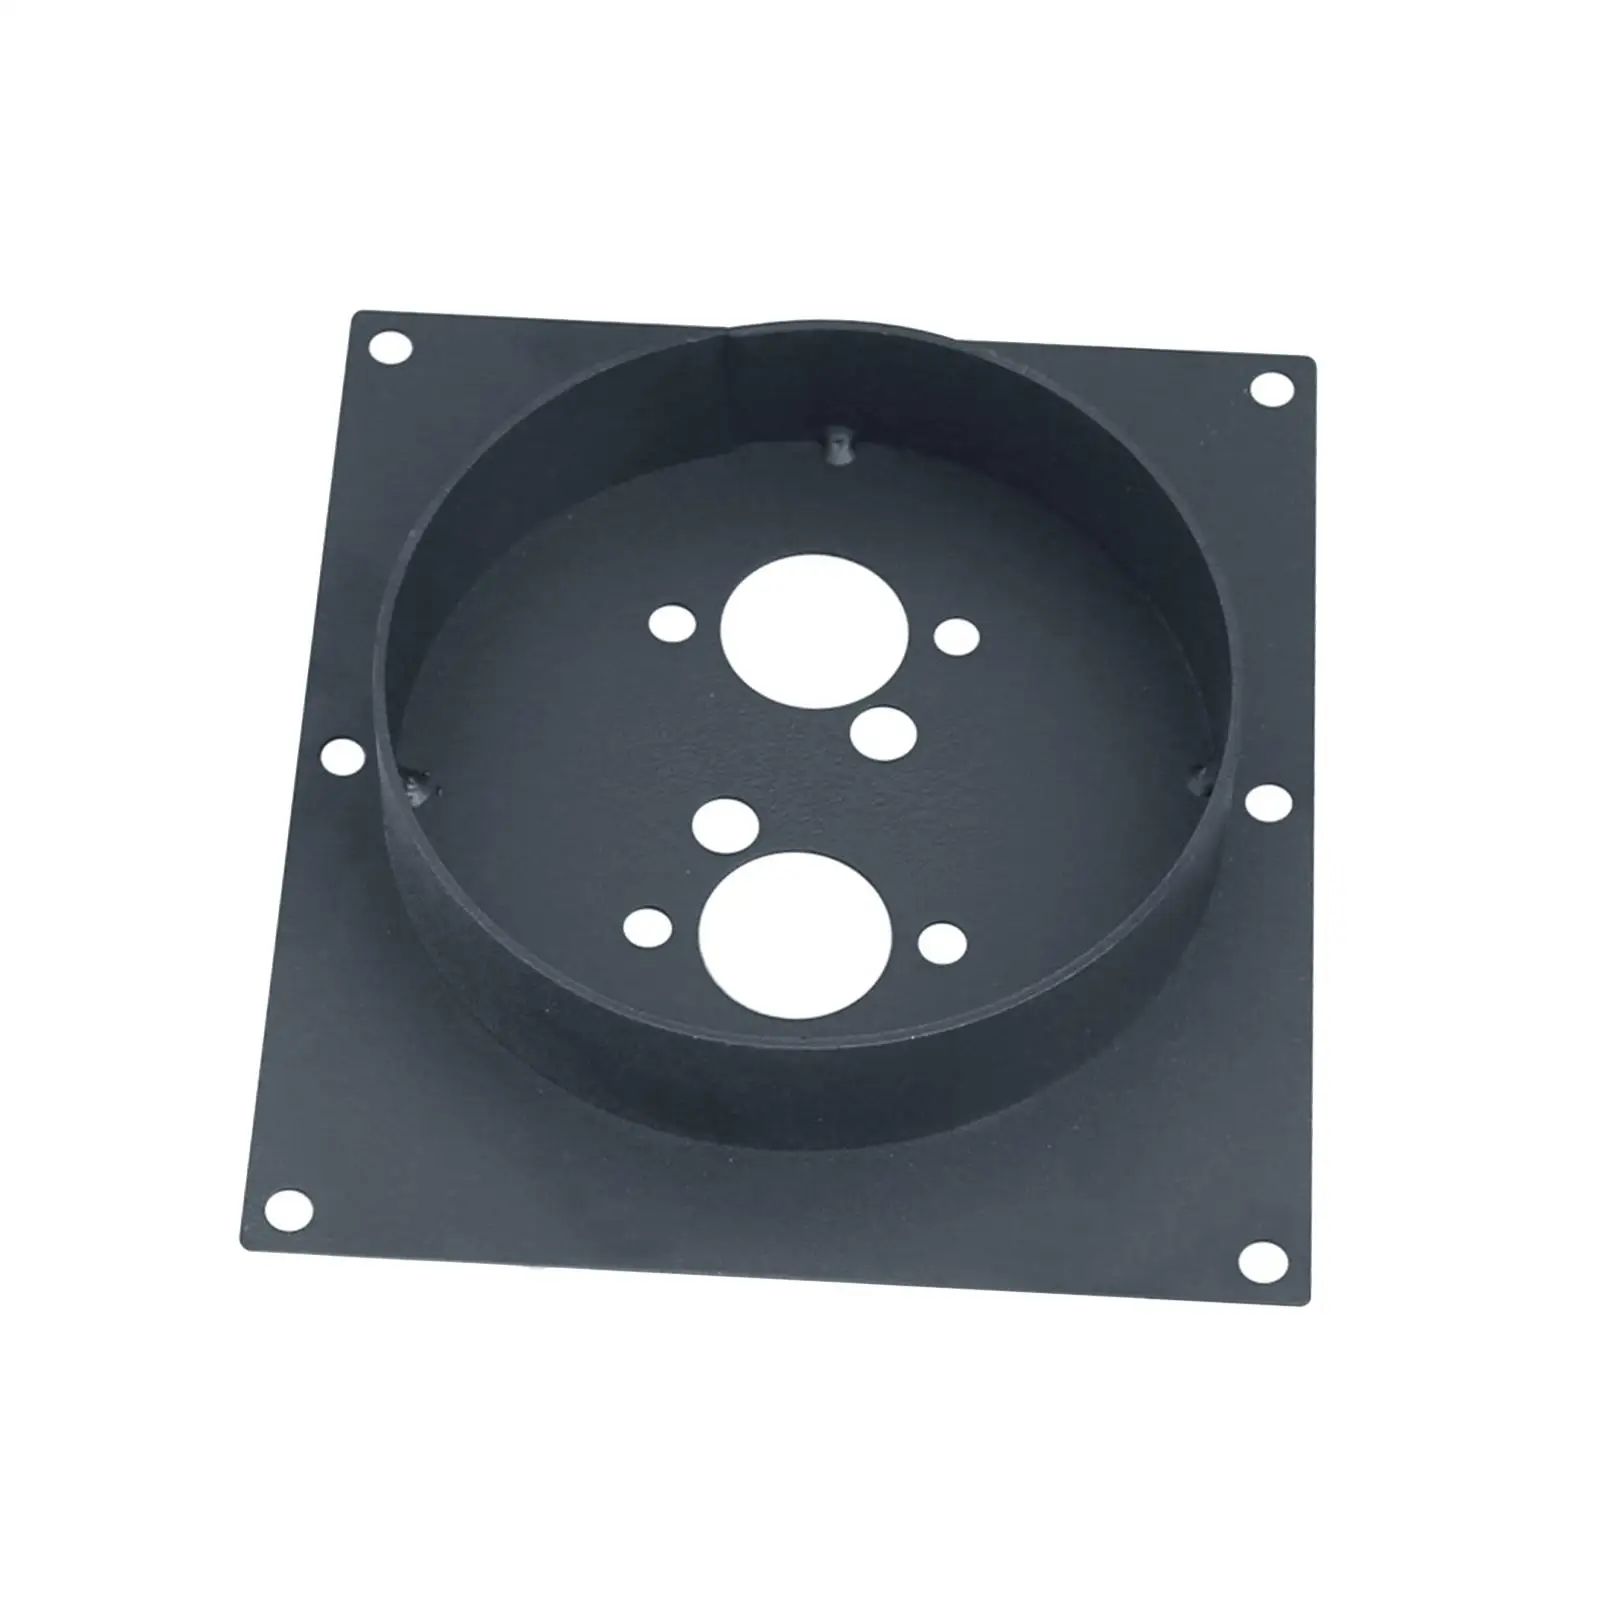 Steel Plate Parking Heater Base Mounting Bracket Heater Parts Heating Strengthen Easy to Install Floor Plate for Motorhome